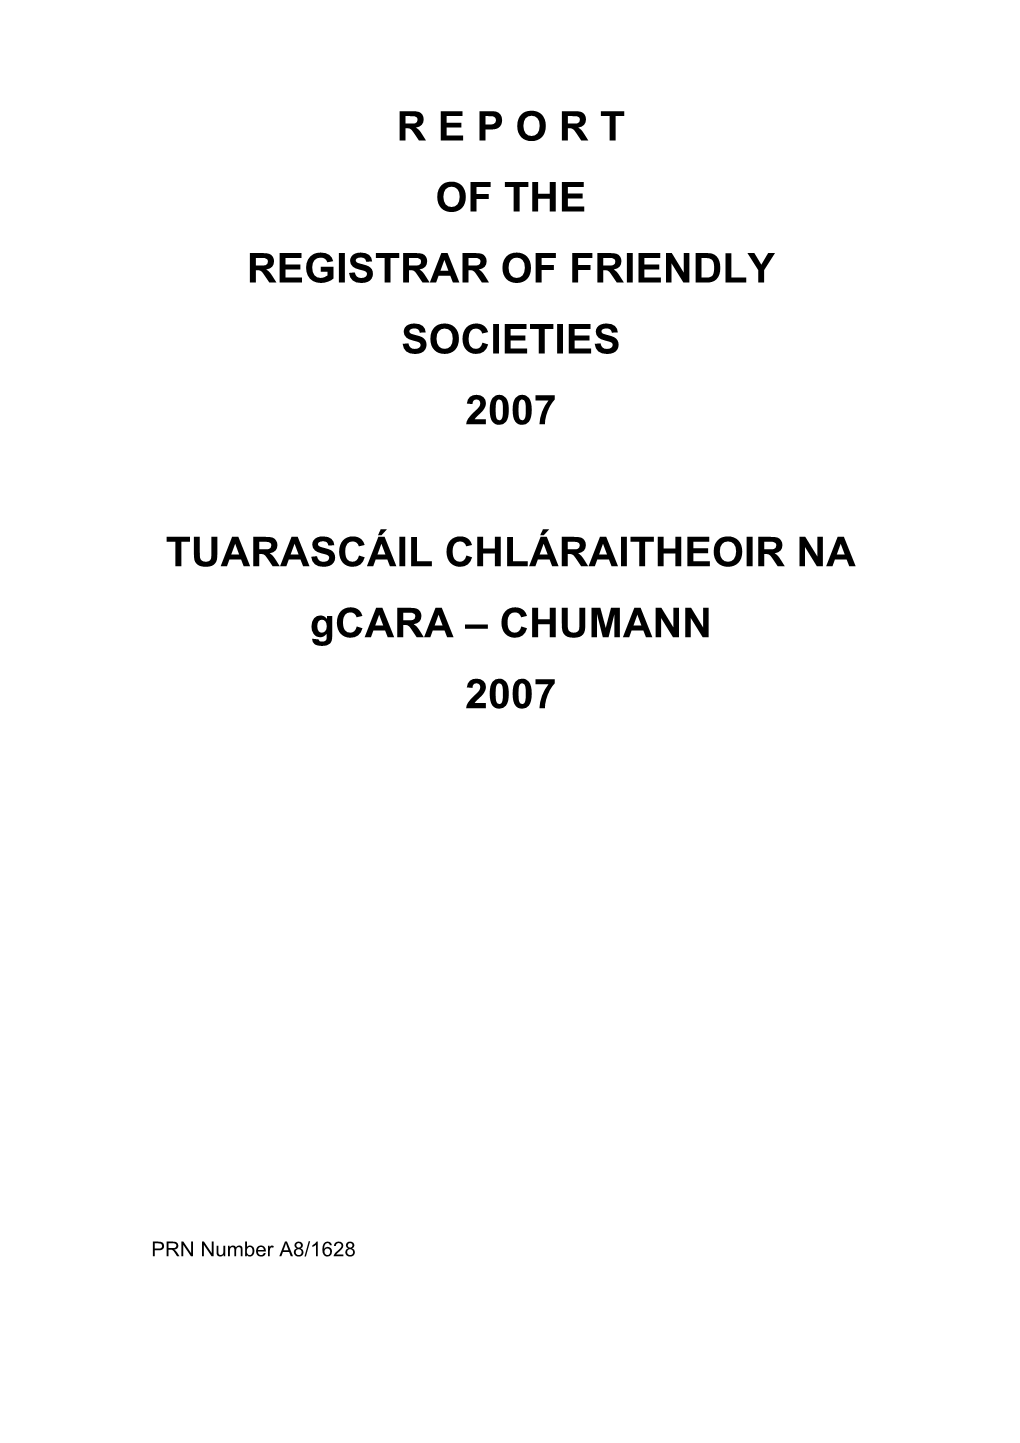 Annual Report of the Registry of Friendly Societies 2007